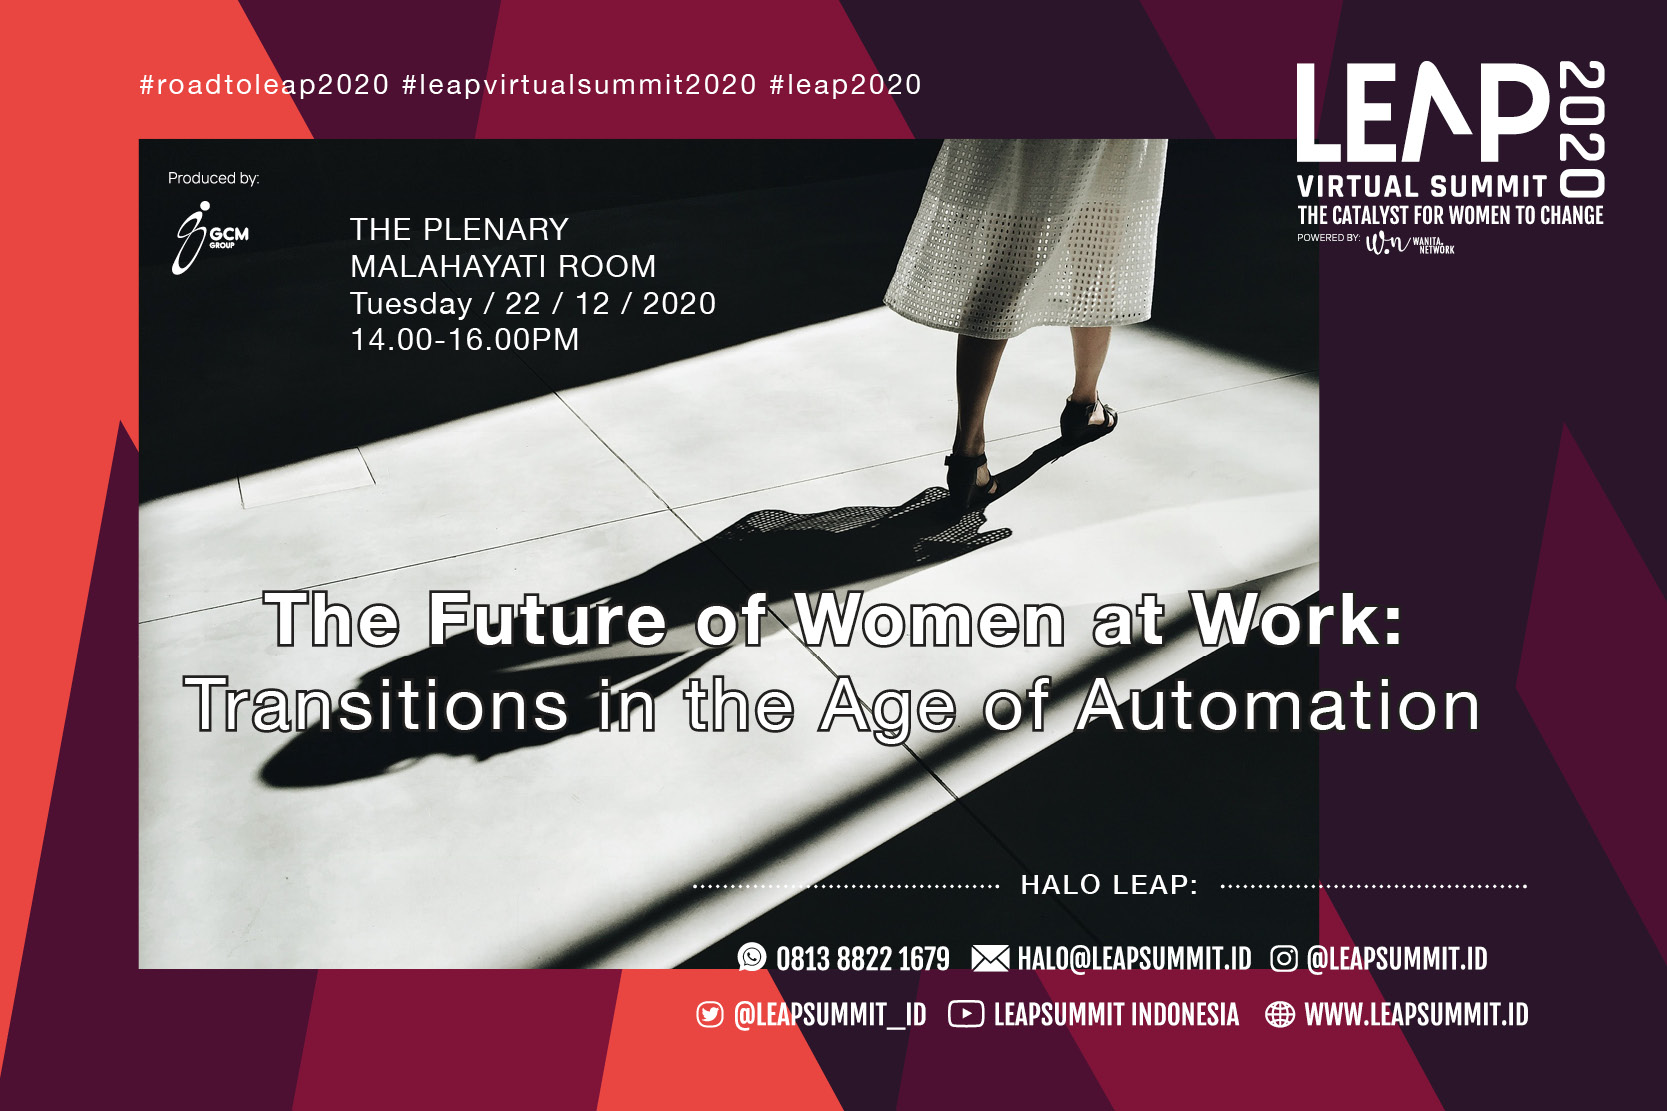 The Plenary: The Future of Women at Work